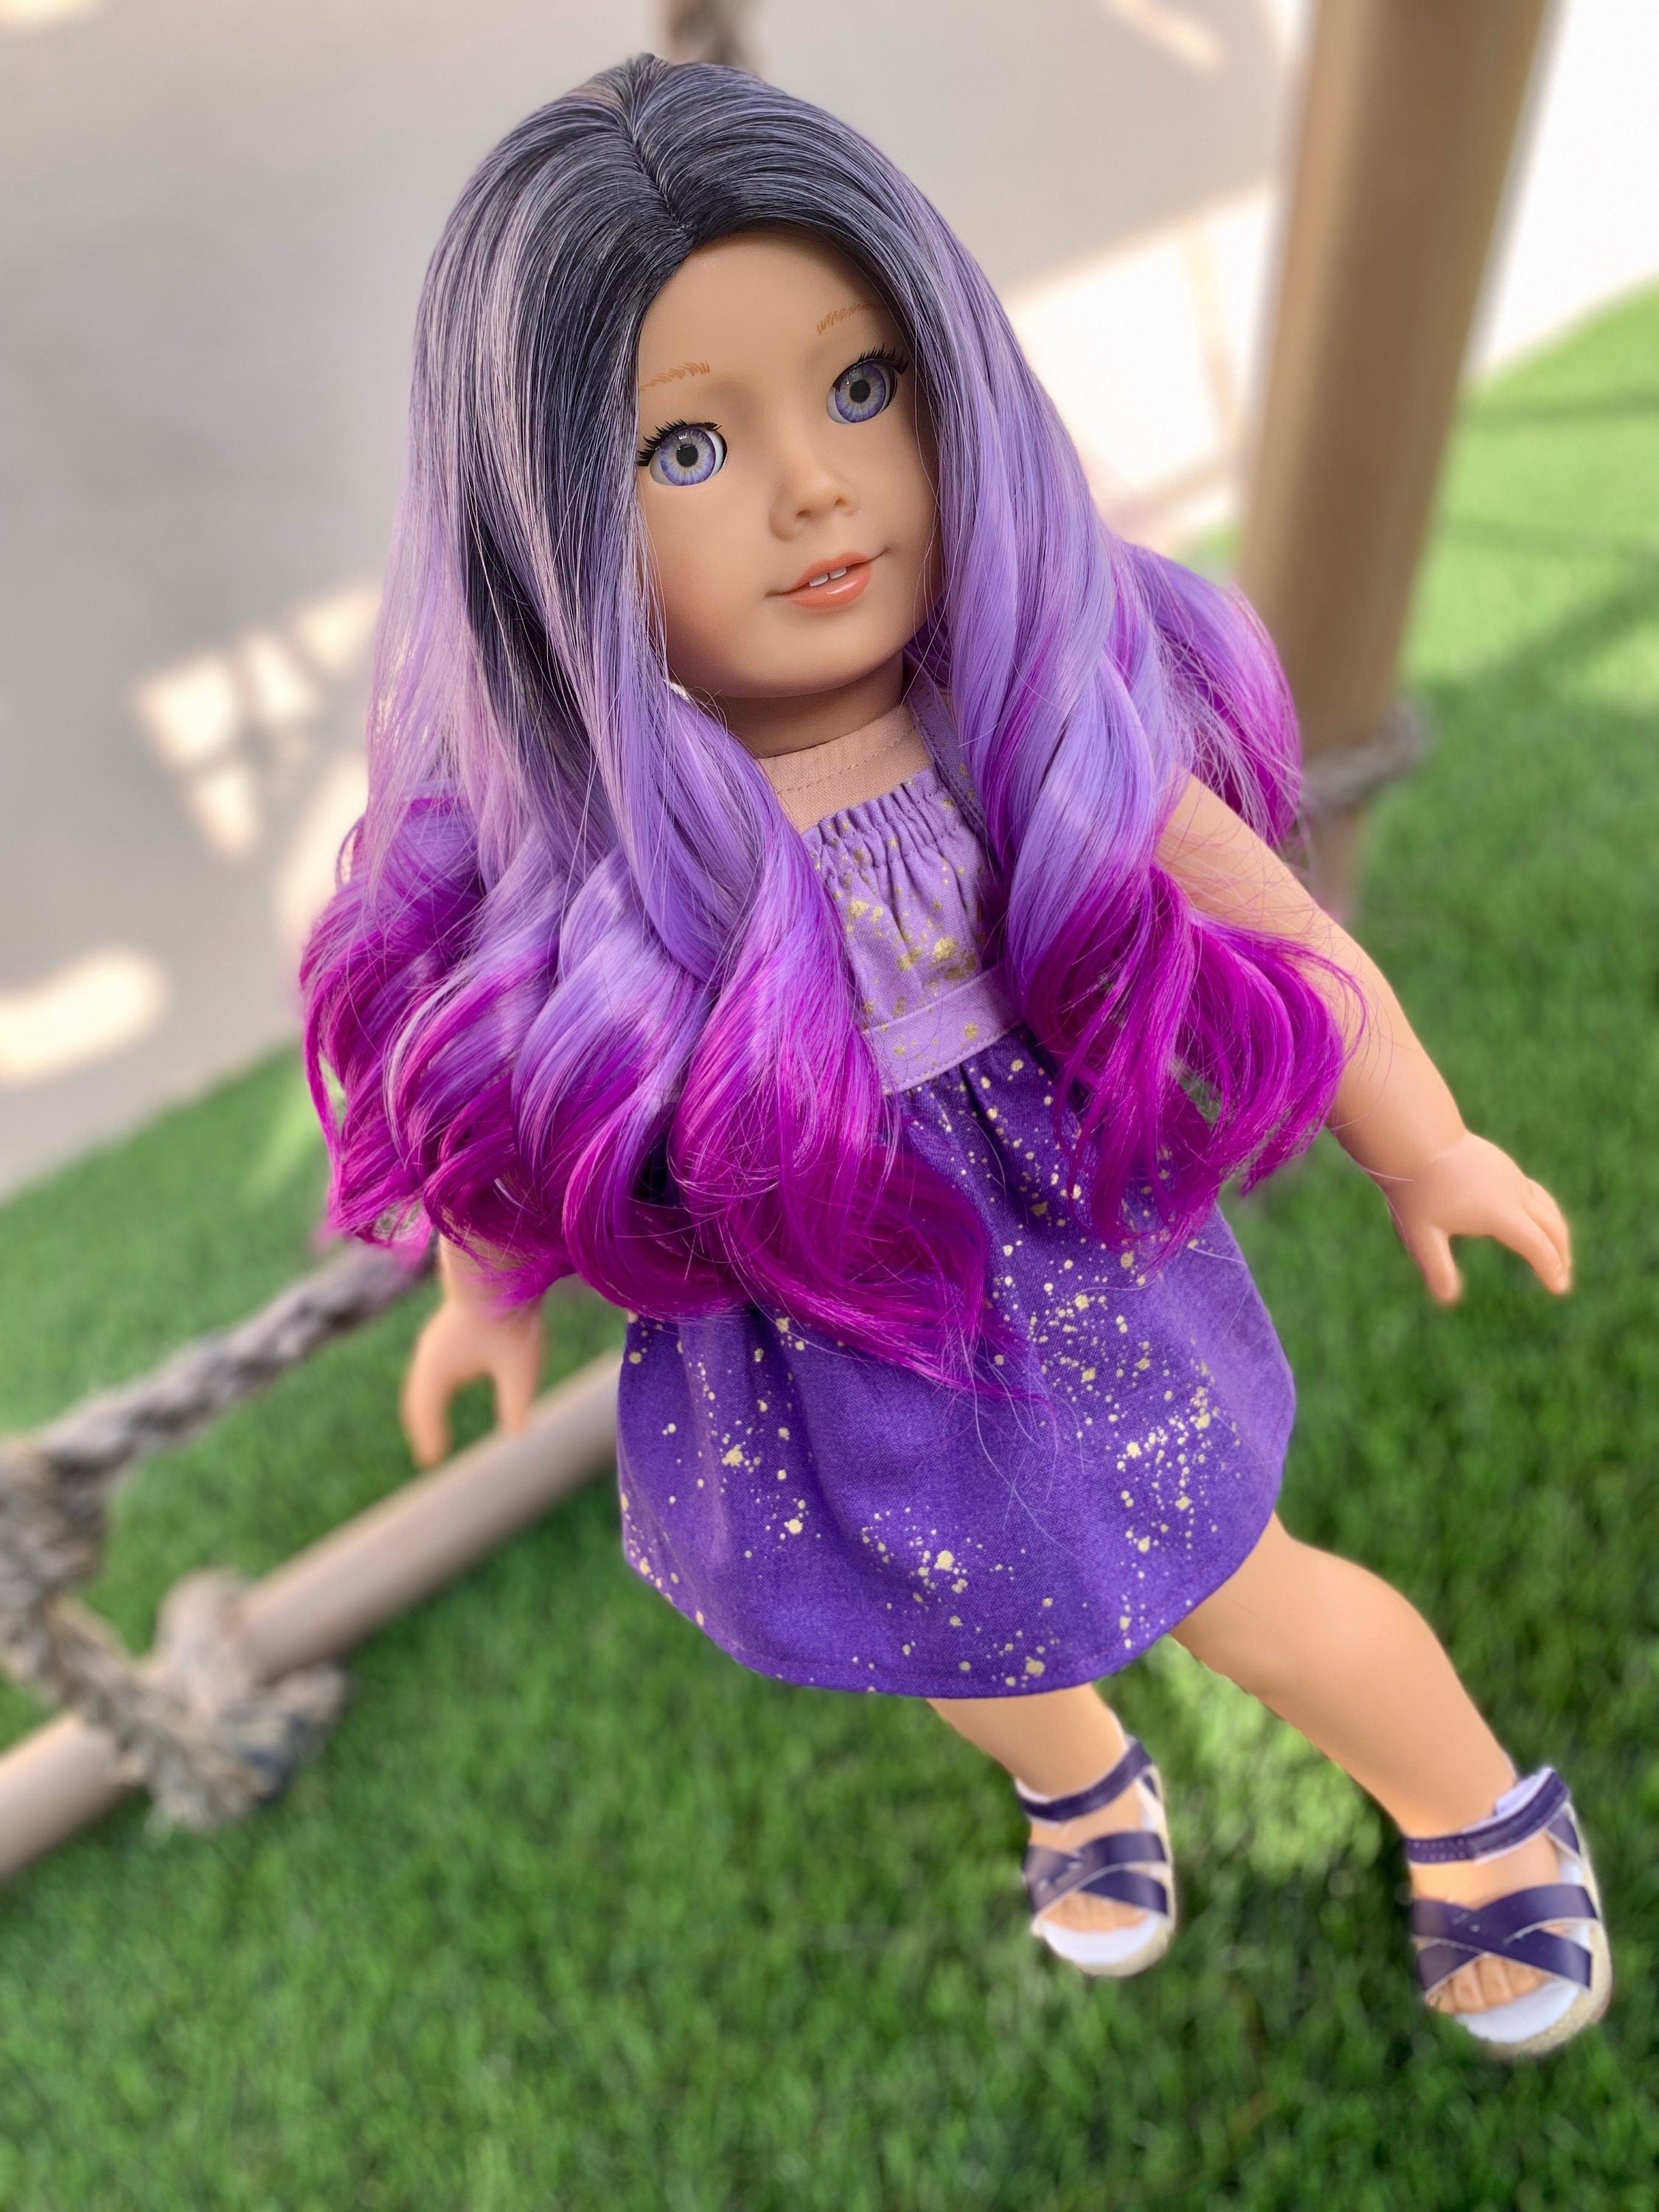 Custom doll wig for 18" American Girl Dolls-Heat Safe-Tangle Resistant-fits 10-11" head size of 18" dolls OG Journey Gotz Dyed Ombre